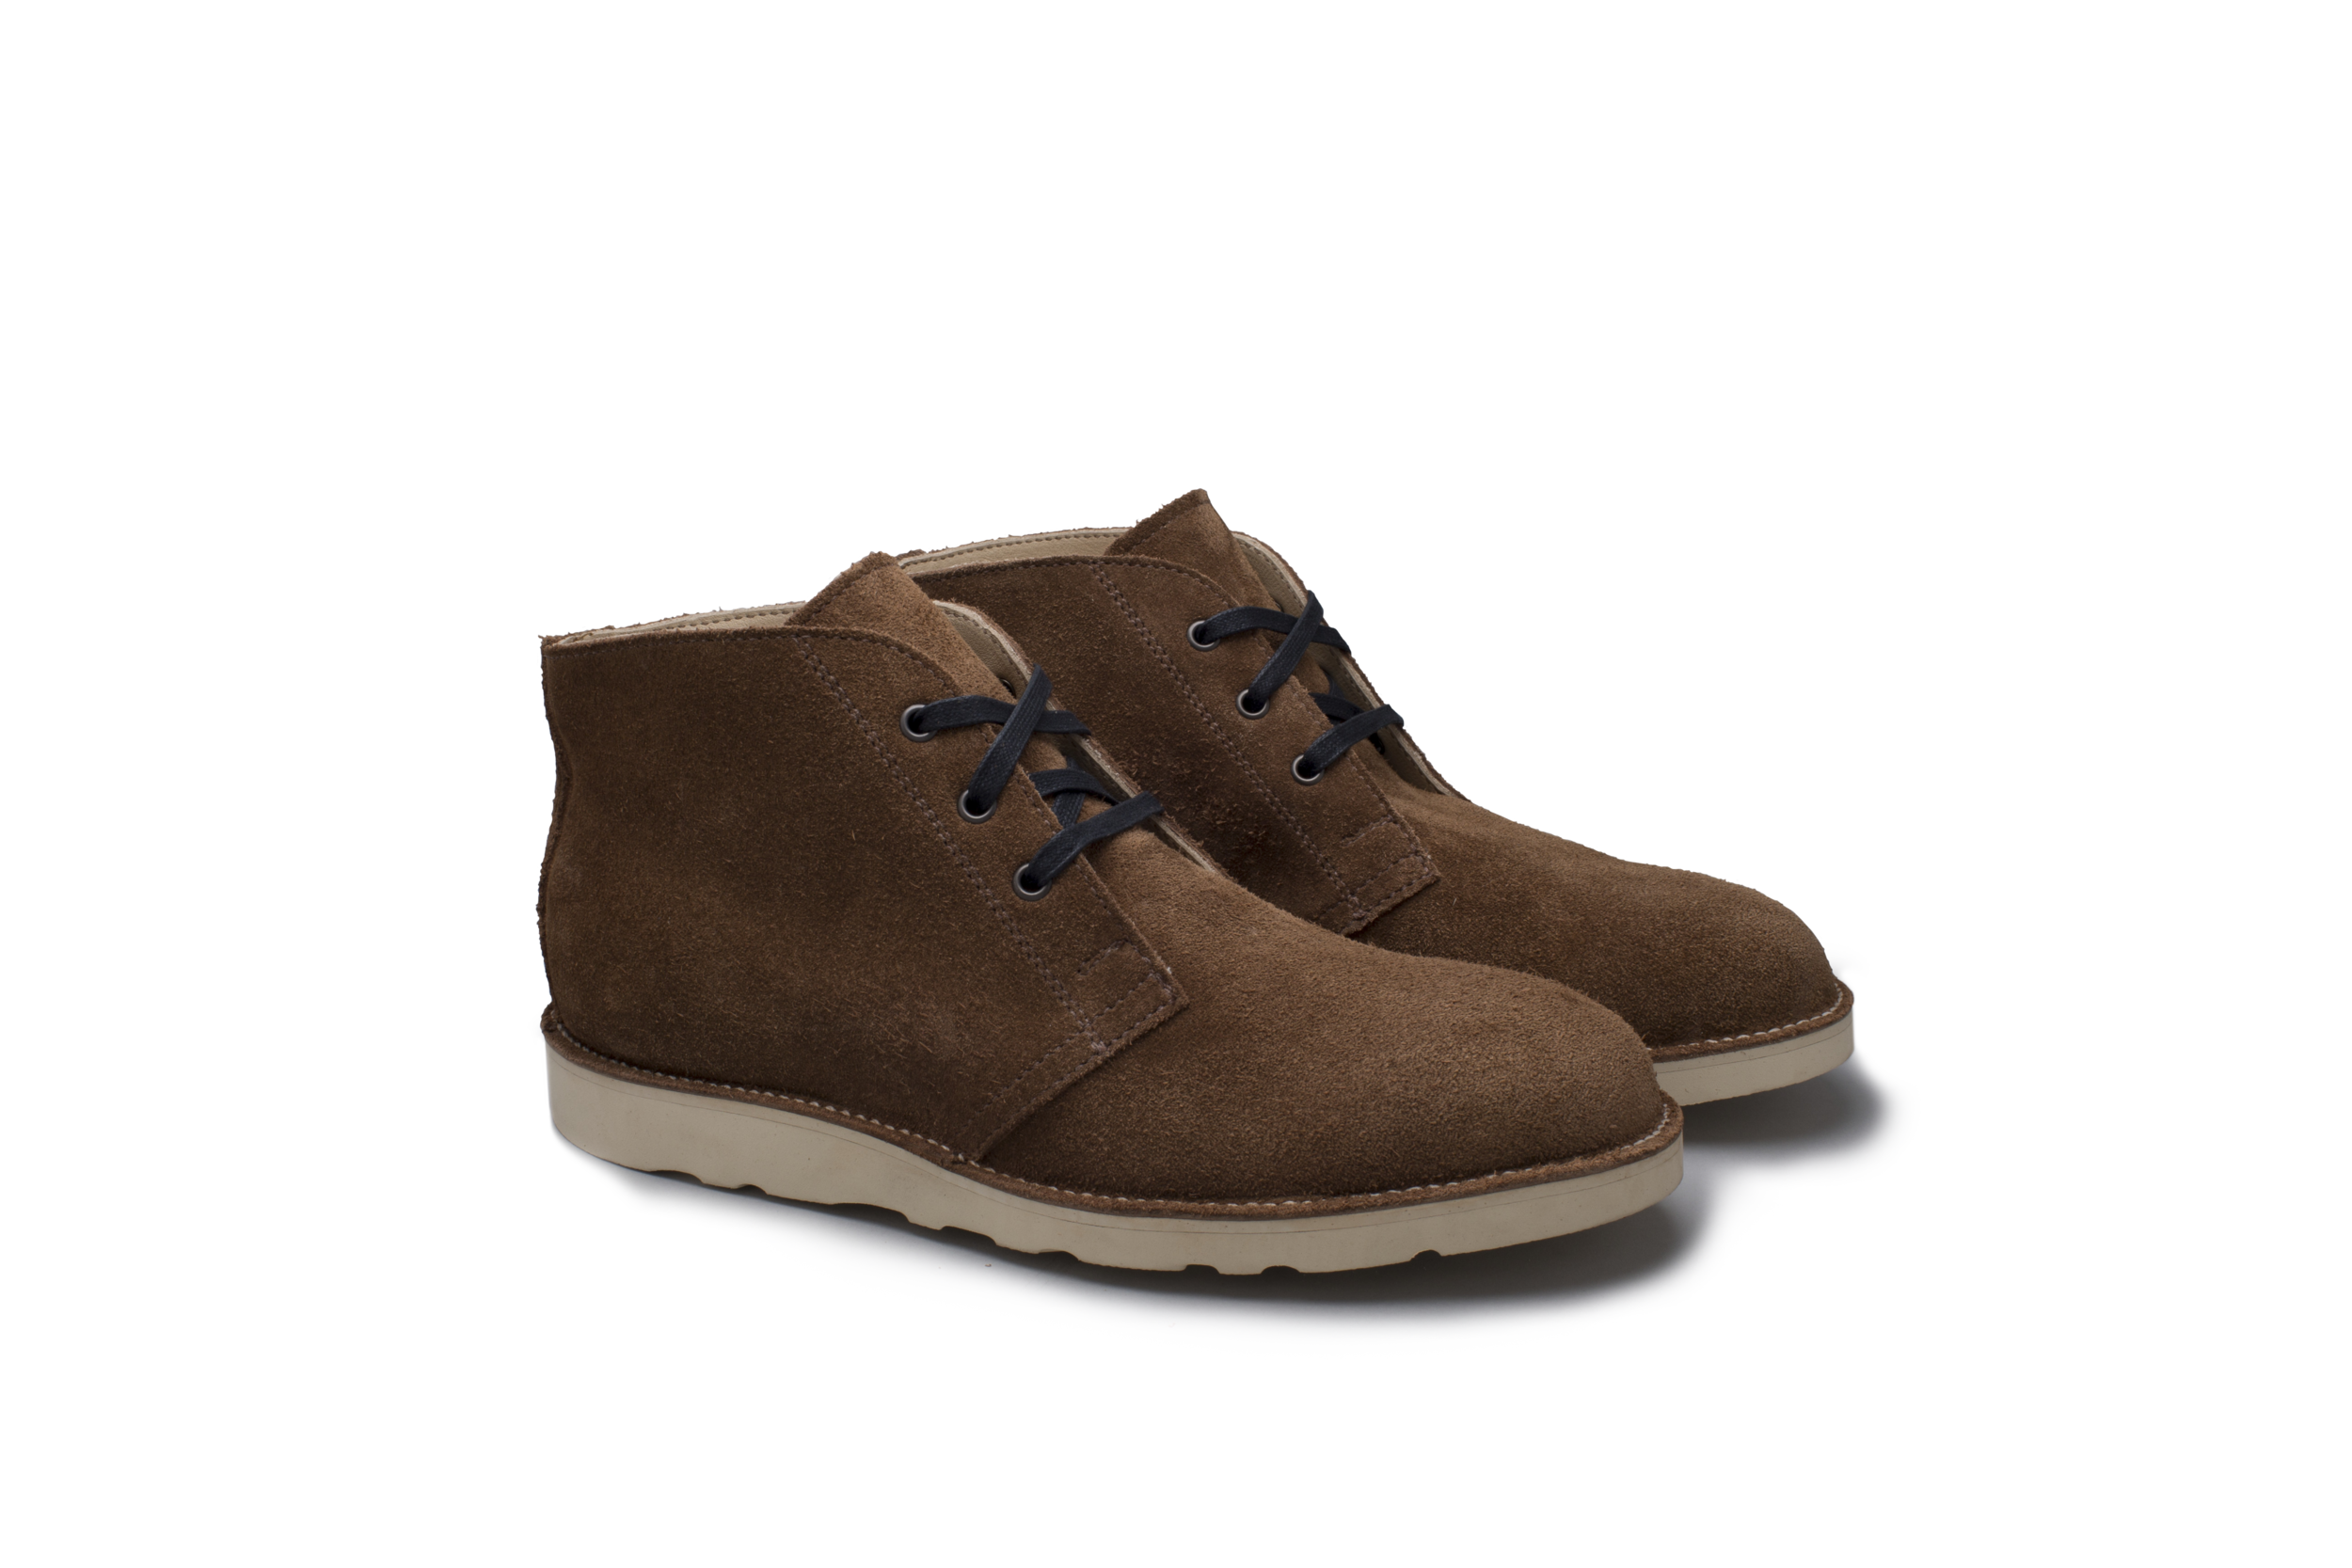 BADLANDS BOOT — Crary Shoes